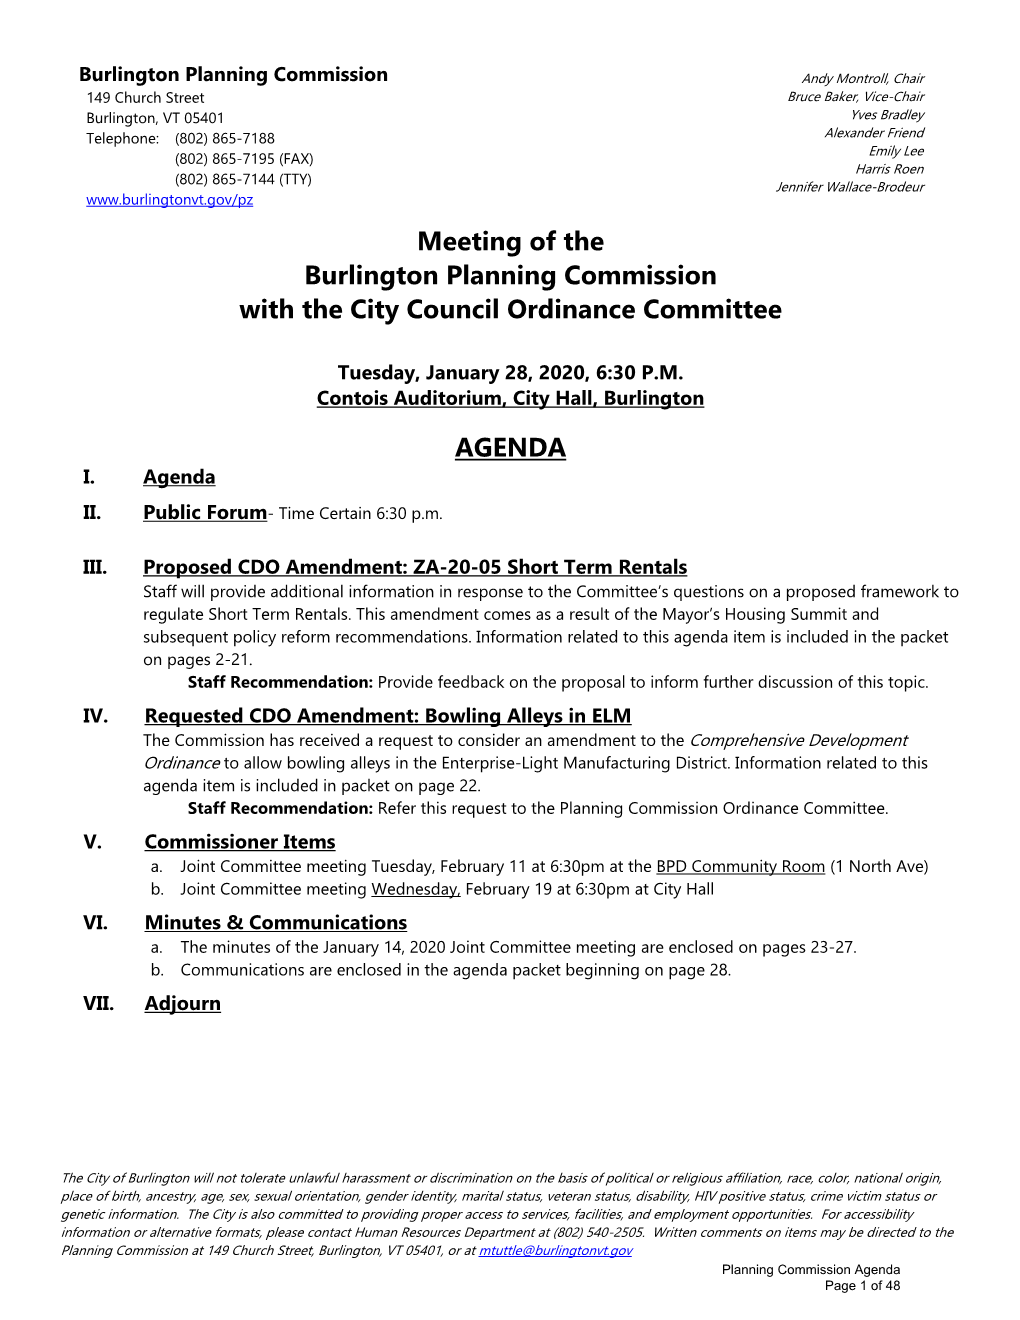 Meeting of the Burlington Planning Commission with the City Council Ordinance Committee